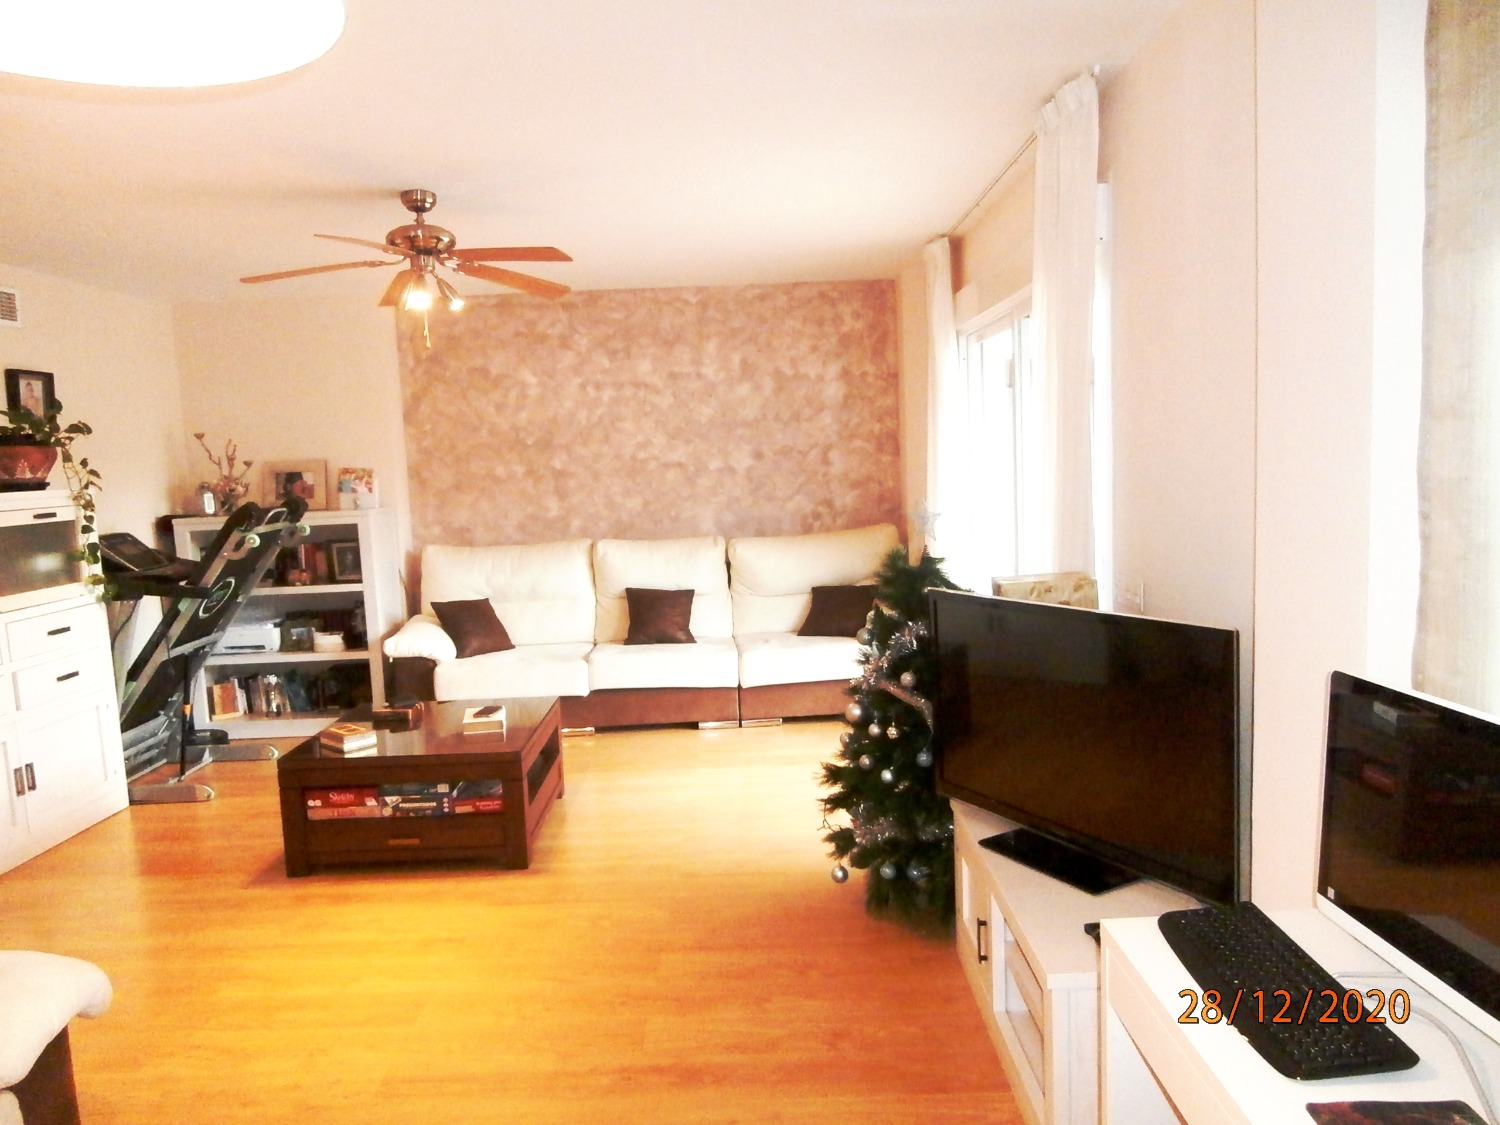 IMPECCABLE PENTHOUSE AT A REDUCED AND NEGOTIABLE PRICE, Excellent duplex penthouse, renovated.